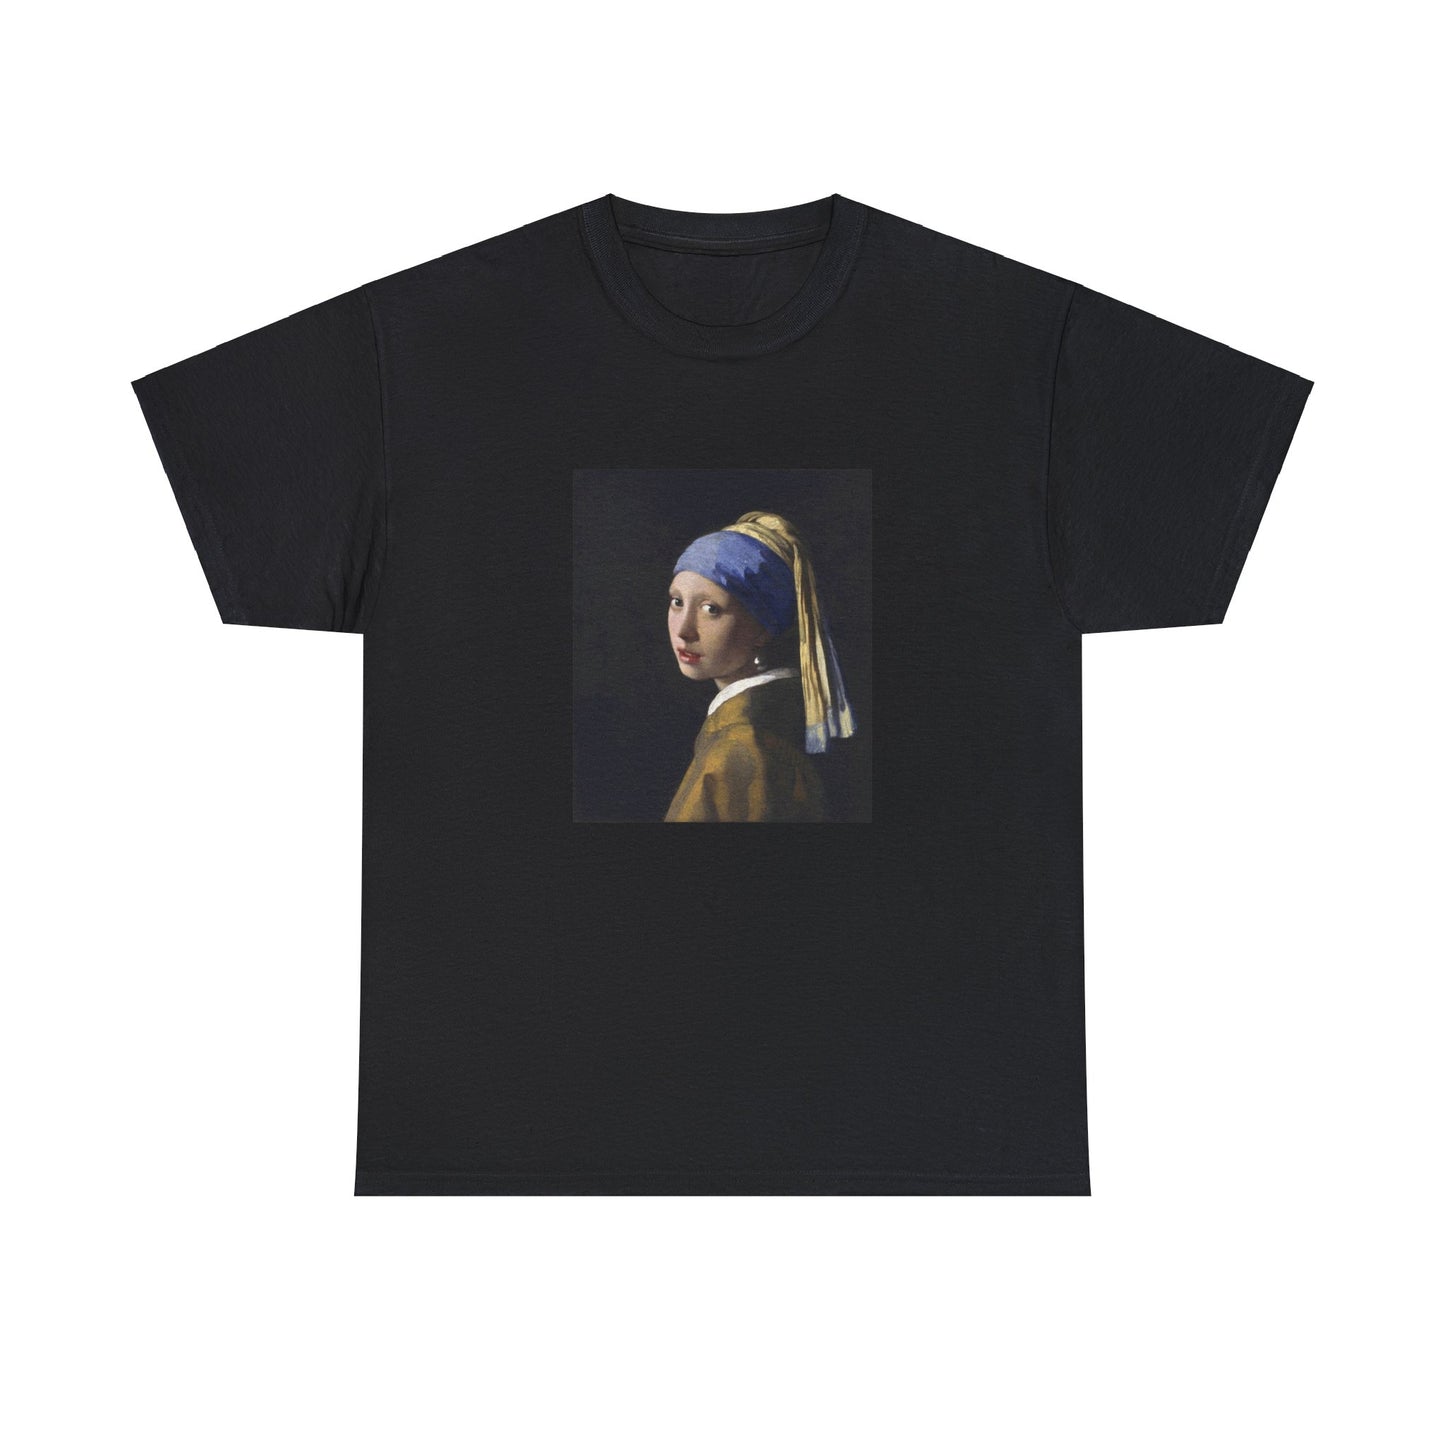 Johannes Vermeer - Girl with a Pearl Earring (1665)